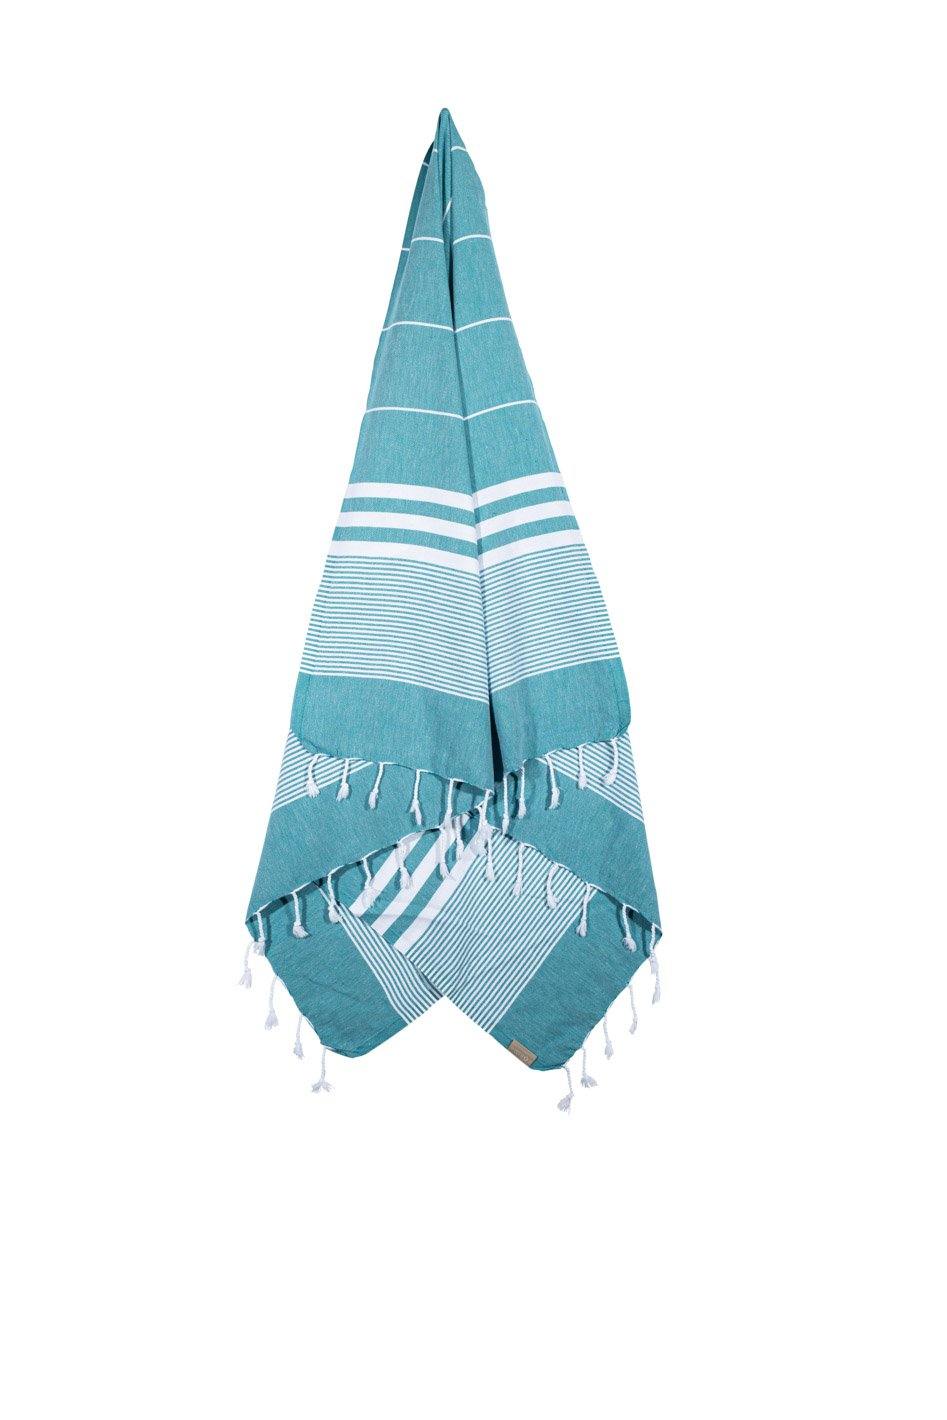 Kali - Teal and White Striped Quick Drying Towel Hanging